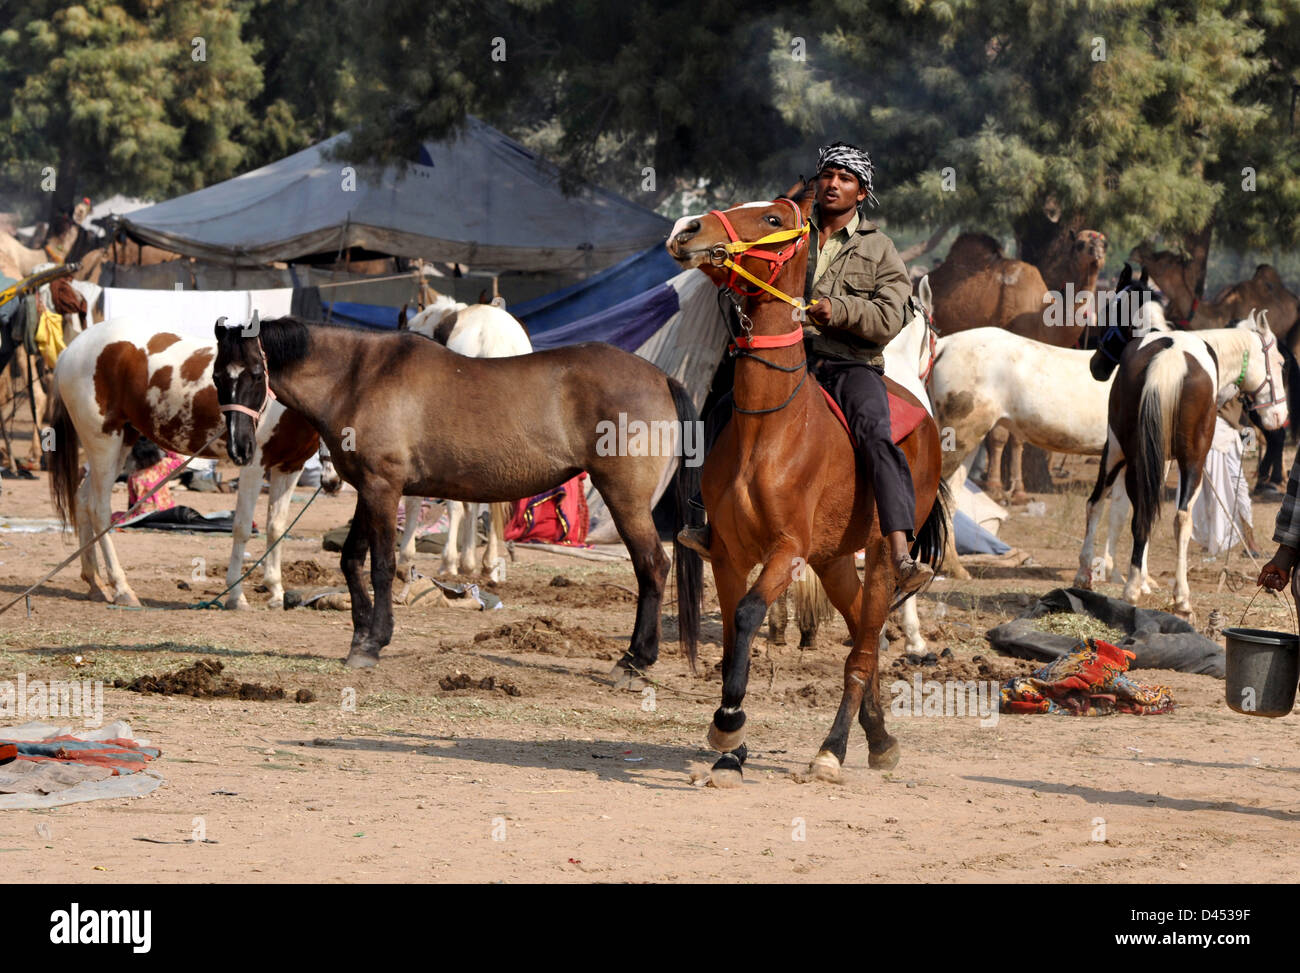 A buyer takes test ride of a horse during cattle fair in western Indian town of Nagaur, in Rajasthan state Stock Photo